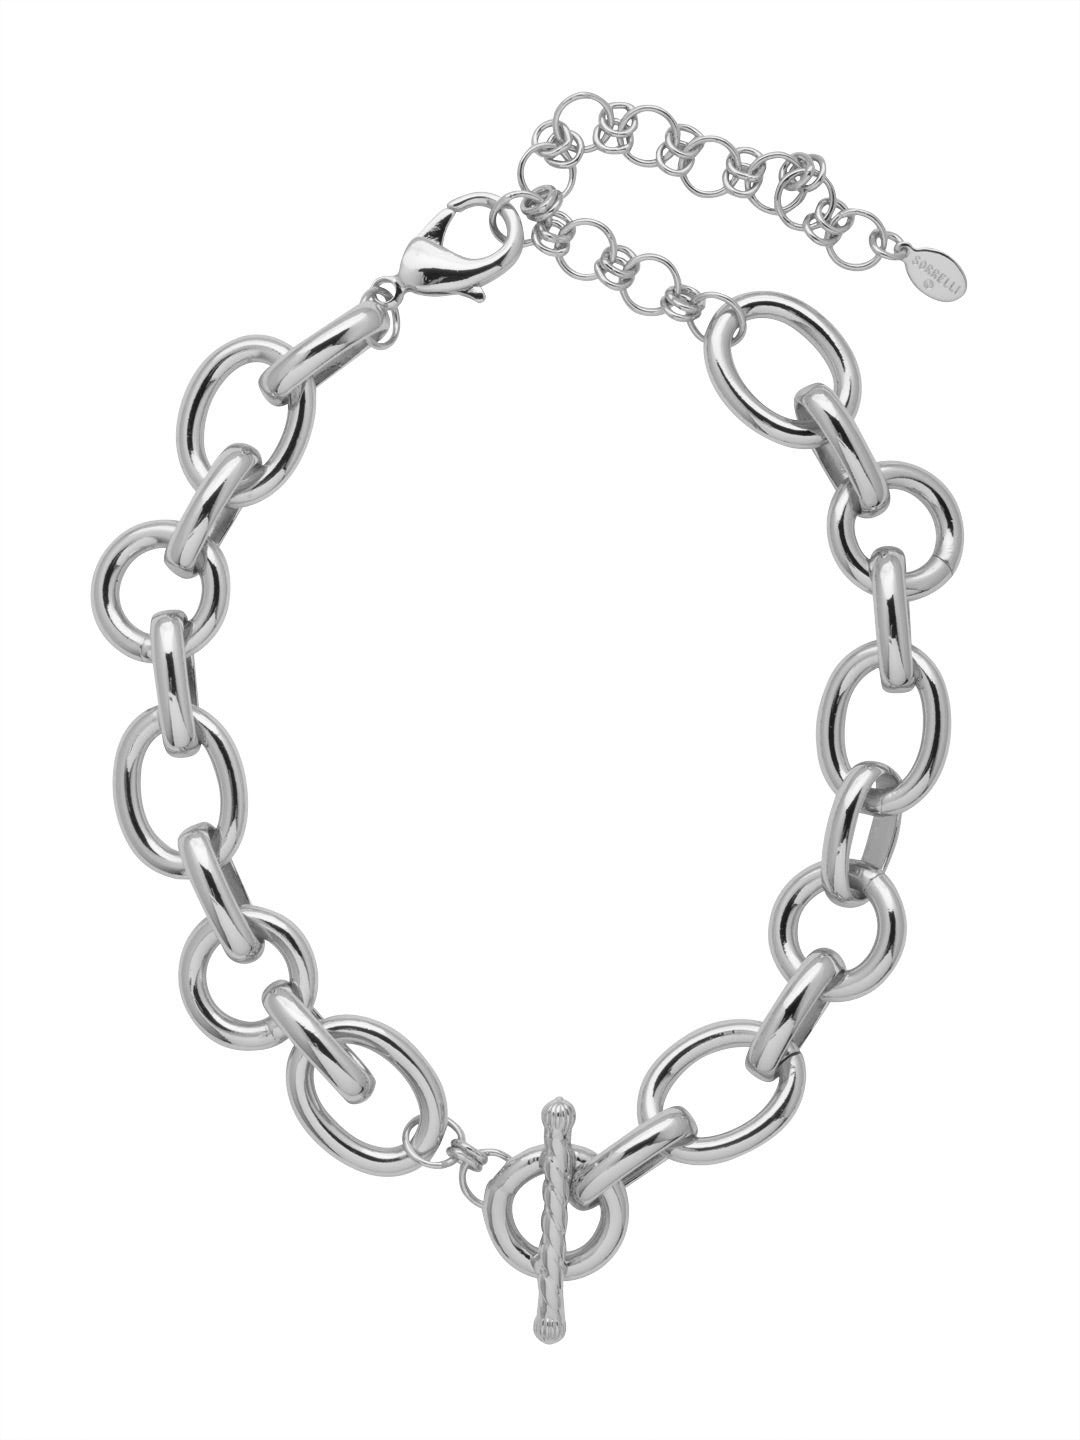 Jeanette Statement Necklace - 4NFC5PDMTL - <p>The Jeanette Statement Necklace features chunky chain links and a trendy toggle at the front. Adjustable and secured with a lobster claw clasp, The Jeanette Statement Necklace pairs perfectly with the matching Jeanette Bracelet. From Sorrelli's Bare Metallic collection in our Palladium finish.</p>